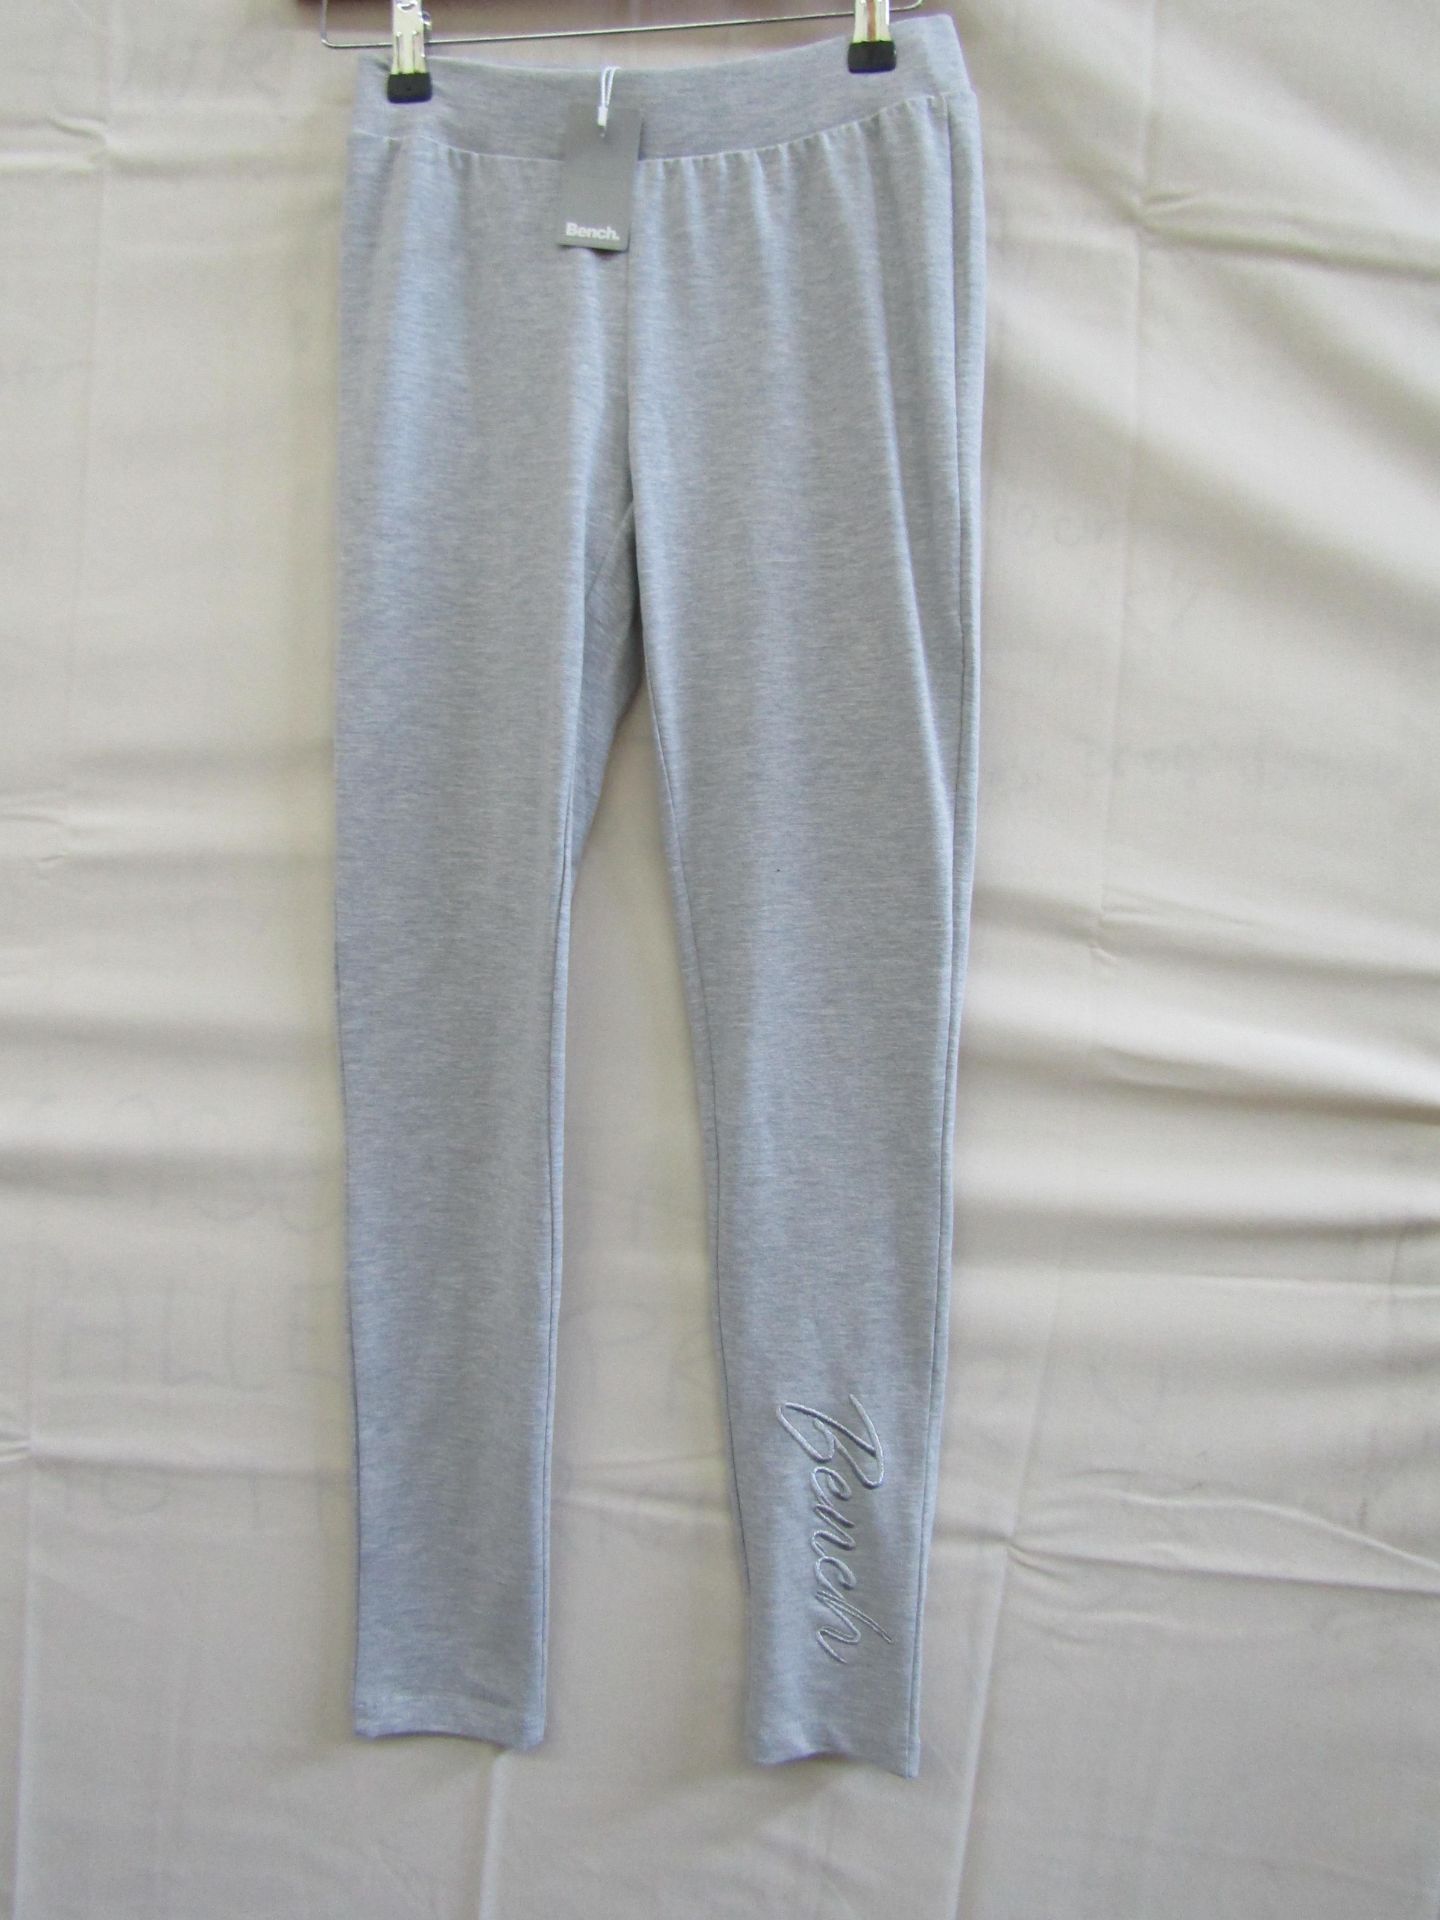 Bench Leggings Grey Size 6-8 New With Tags